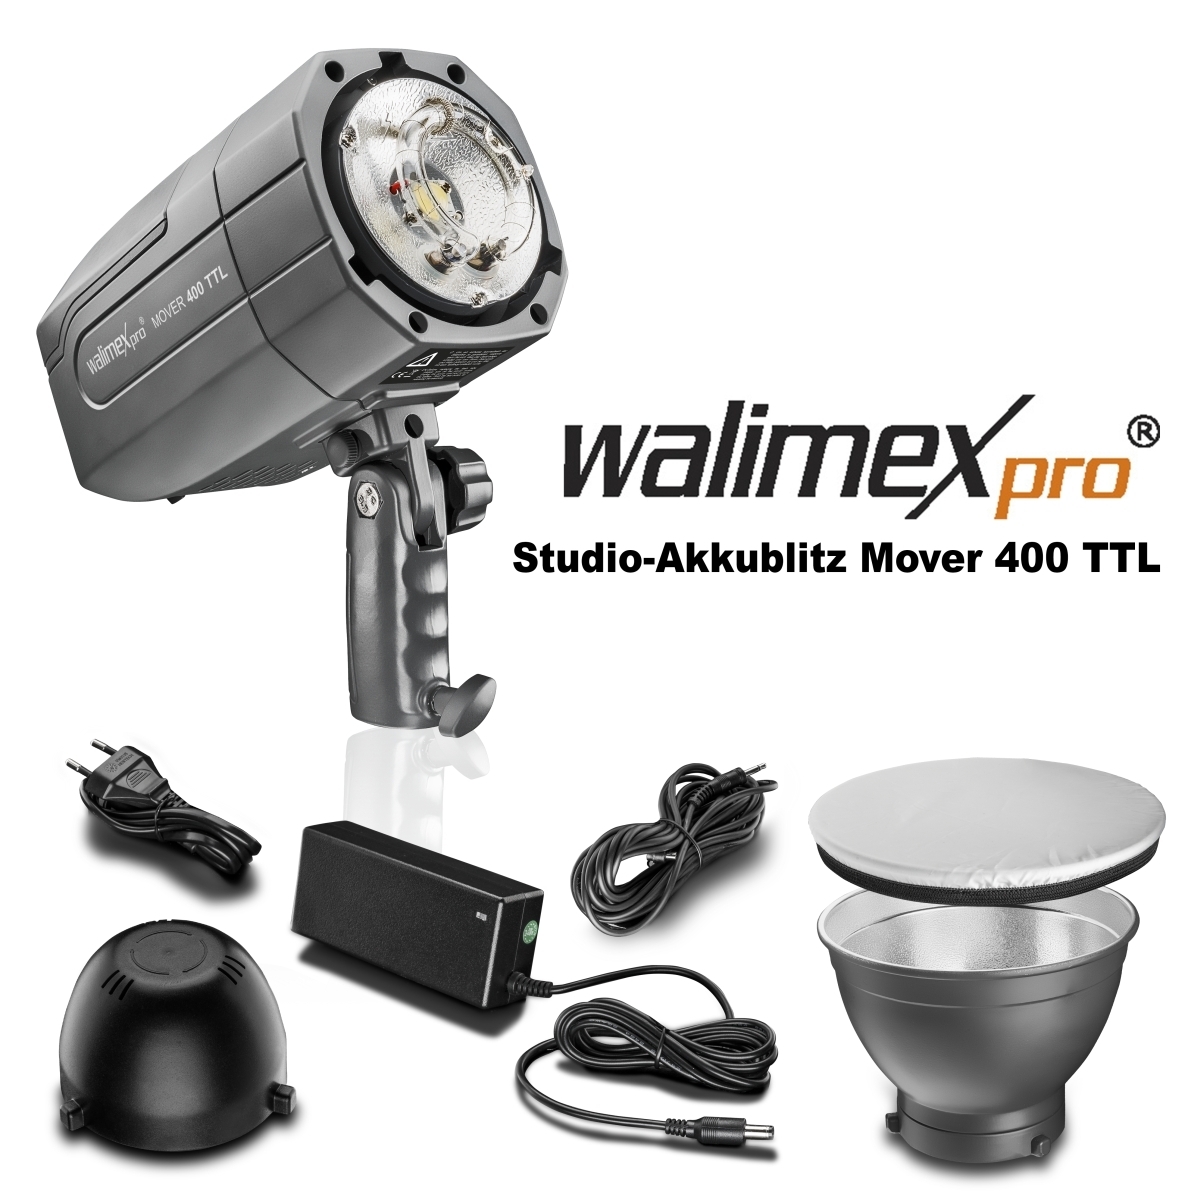 Walimex pro Batterie pour Mover 200 TTL - walimex / walimex pro Franc